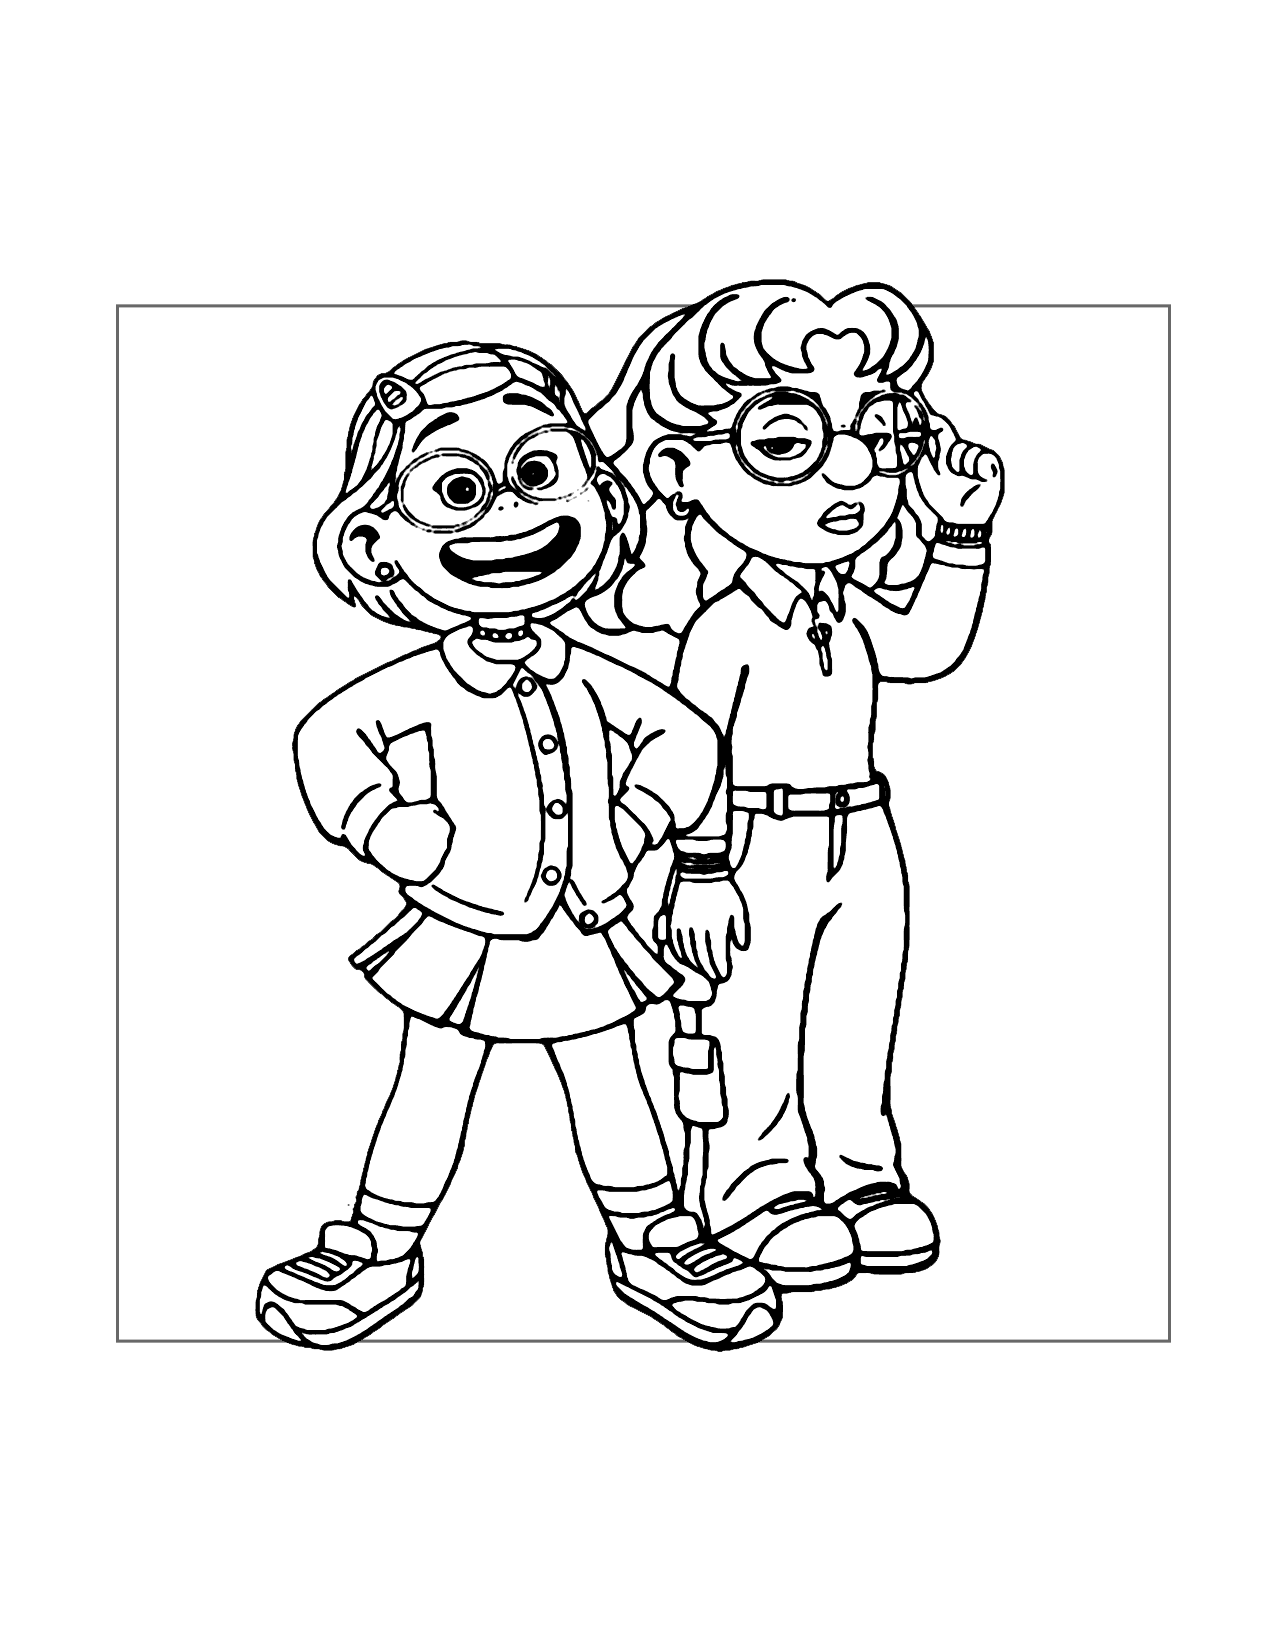 Mei And Priya Coloring Page